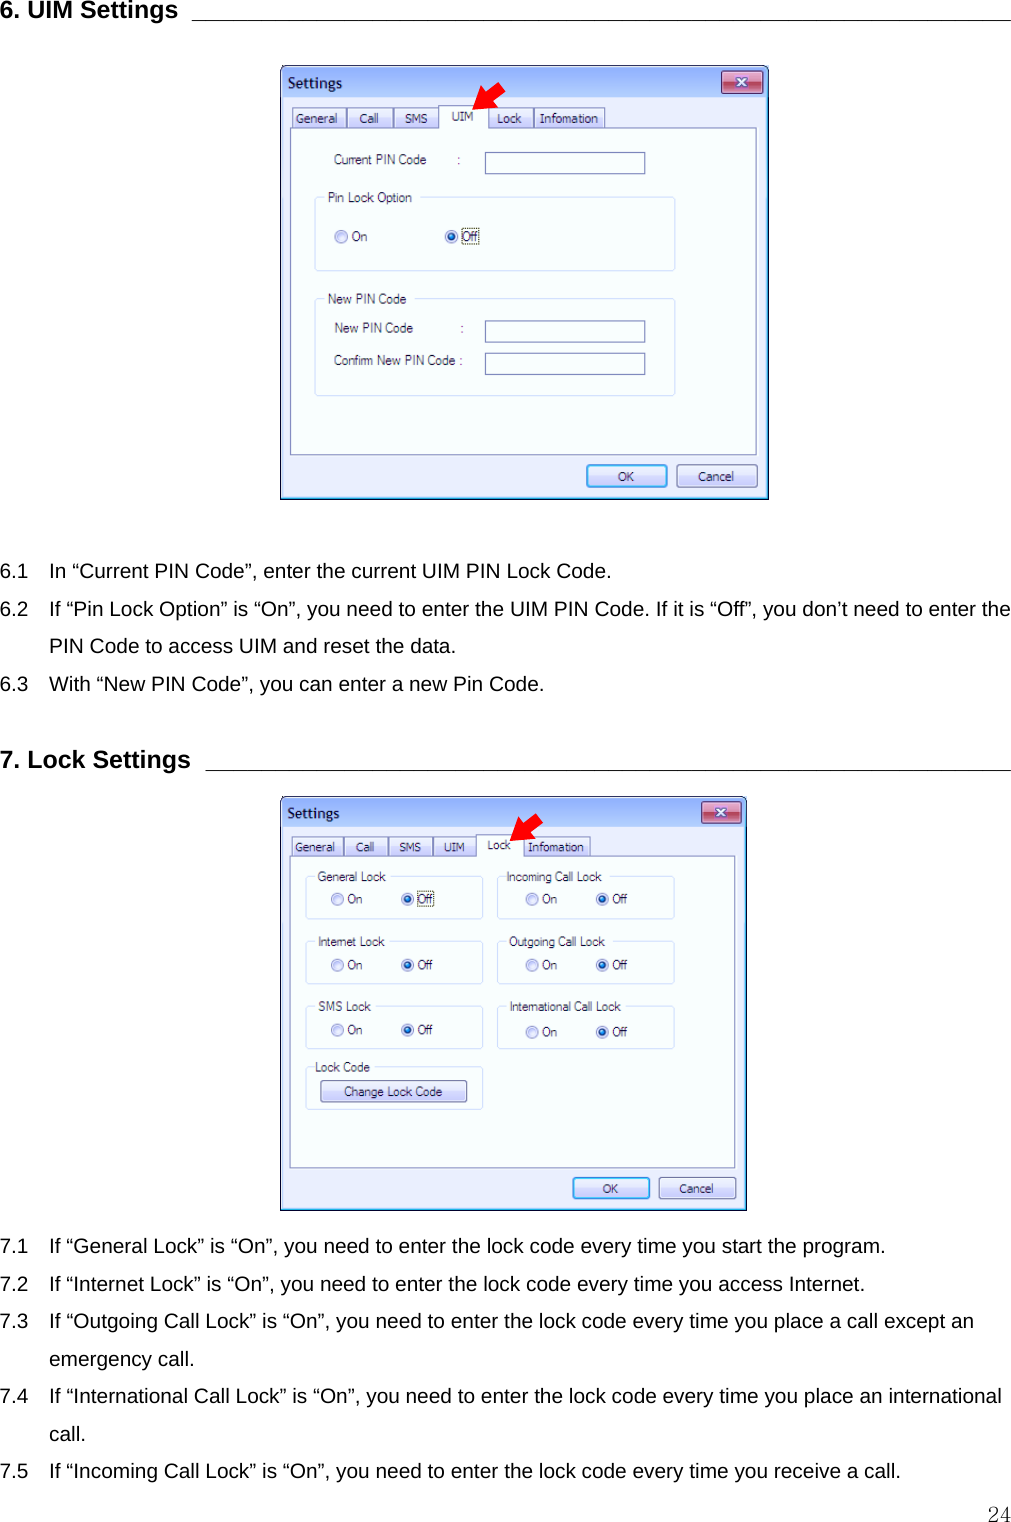  246. UIM Settings  ___________________________________________________________               6.1    In “Current PIN Code”, enter the current UIM PIN Lock Code. 6.2    If “Pin Lock Option” is “On”, you need to enter the UIM PIN Code. If it is “Off”, you don’t need to enter the PIN Code to access UIM and reset the data. 6.3    With “New PIN Code”, you can enter a new Pin Code.  7. Lock Settings  __________________________________________________________             7.1    If “General Lock” is “On”, you need to enter the lock code every time you start the program. 7.2   If “Internet Lock” is “On”, you need to enter the lock code every time you access Internet. 7.3    If “Outgoing Call Lock” is “On”, you need to enter the lock code every time you place a call except an emergency call. 7.4    If “International Call Lock” is “On”, you need to enter the lock code every time you place an international call. 7.5   If “Incoming Call Lock” is “On”, you need to enter the lock code every time you receive a call. 